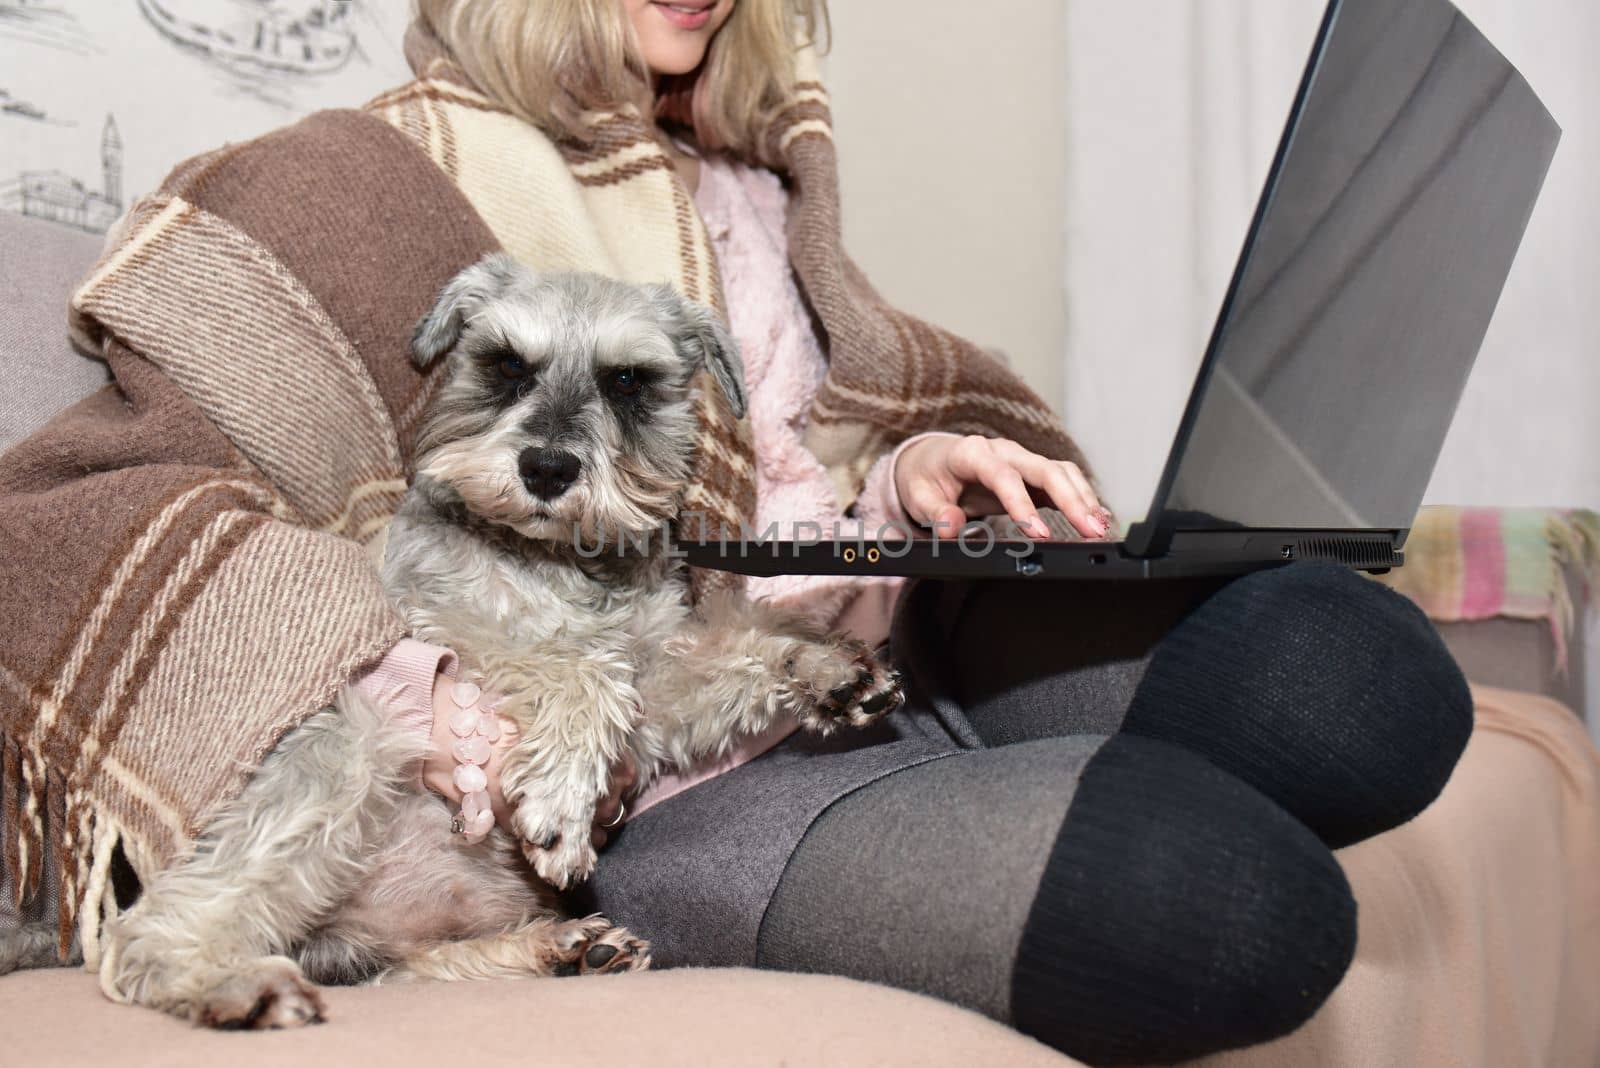 woman in a warm plaid is sitting on a sofa watching movies on a laptop with her cute doggy.